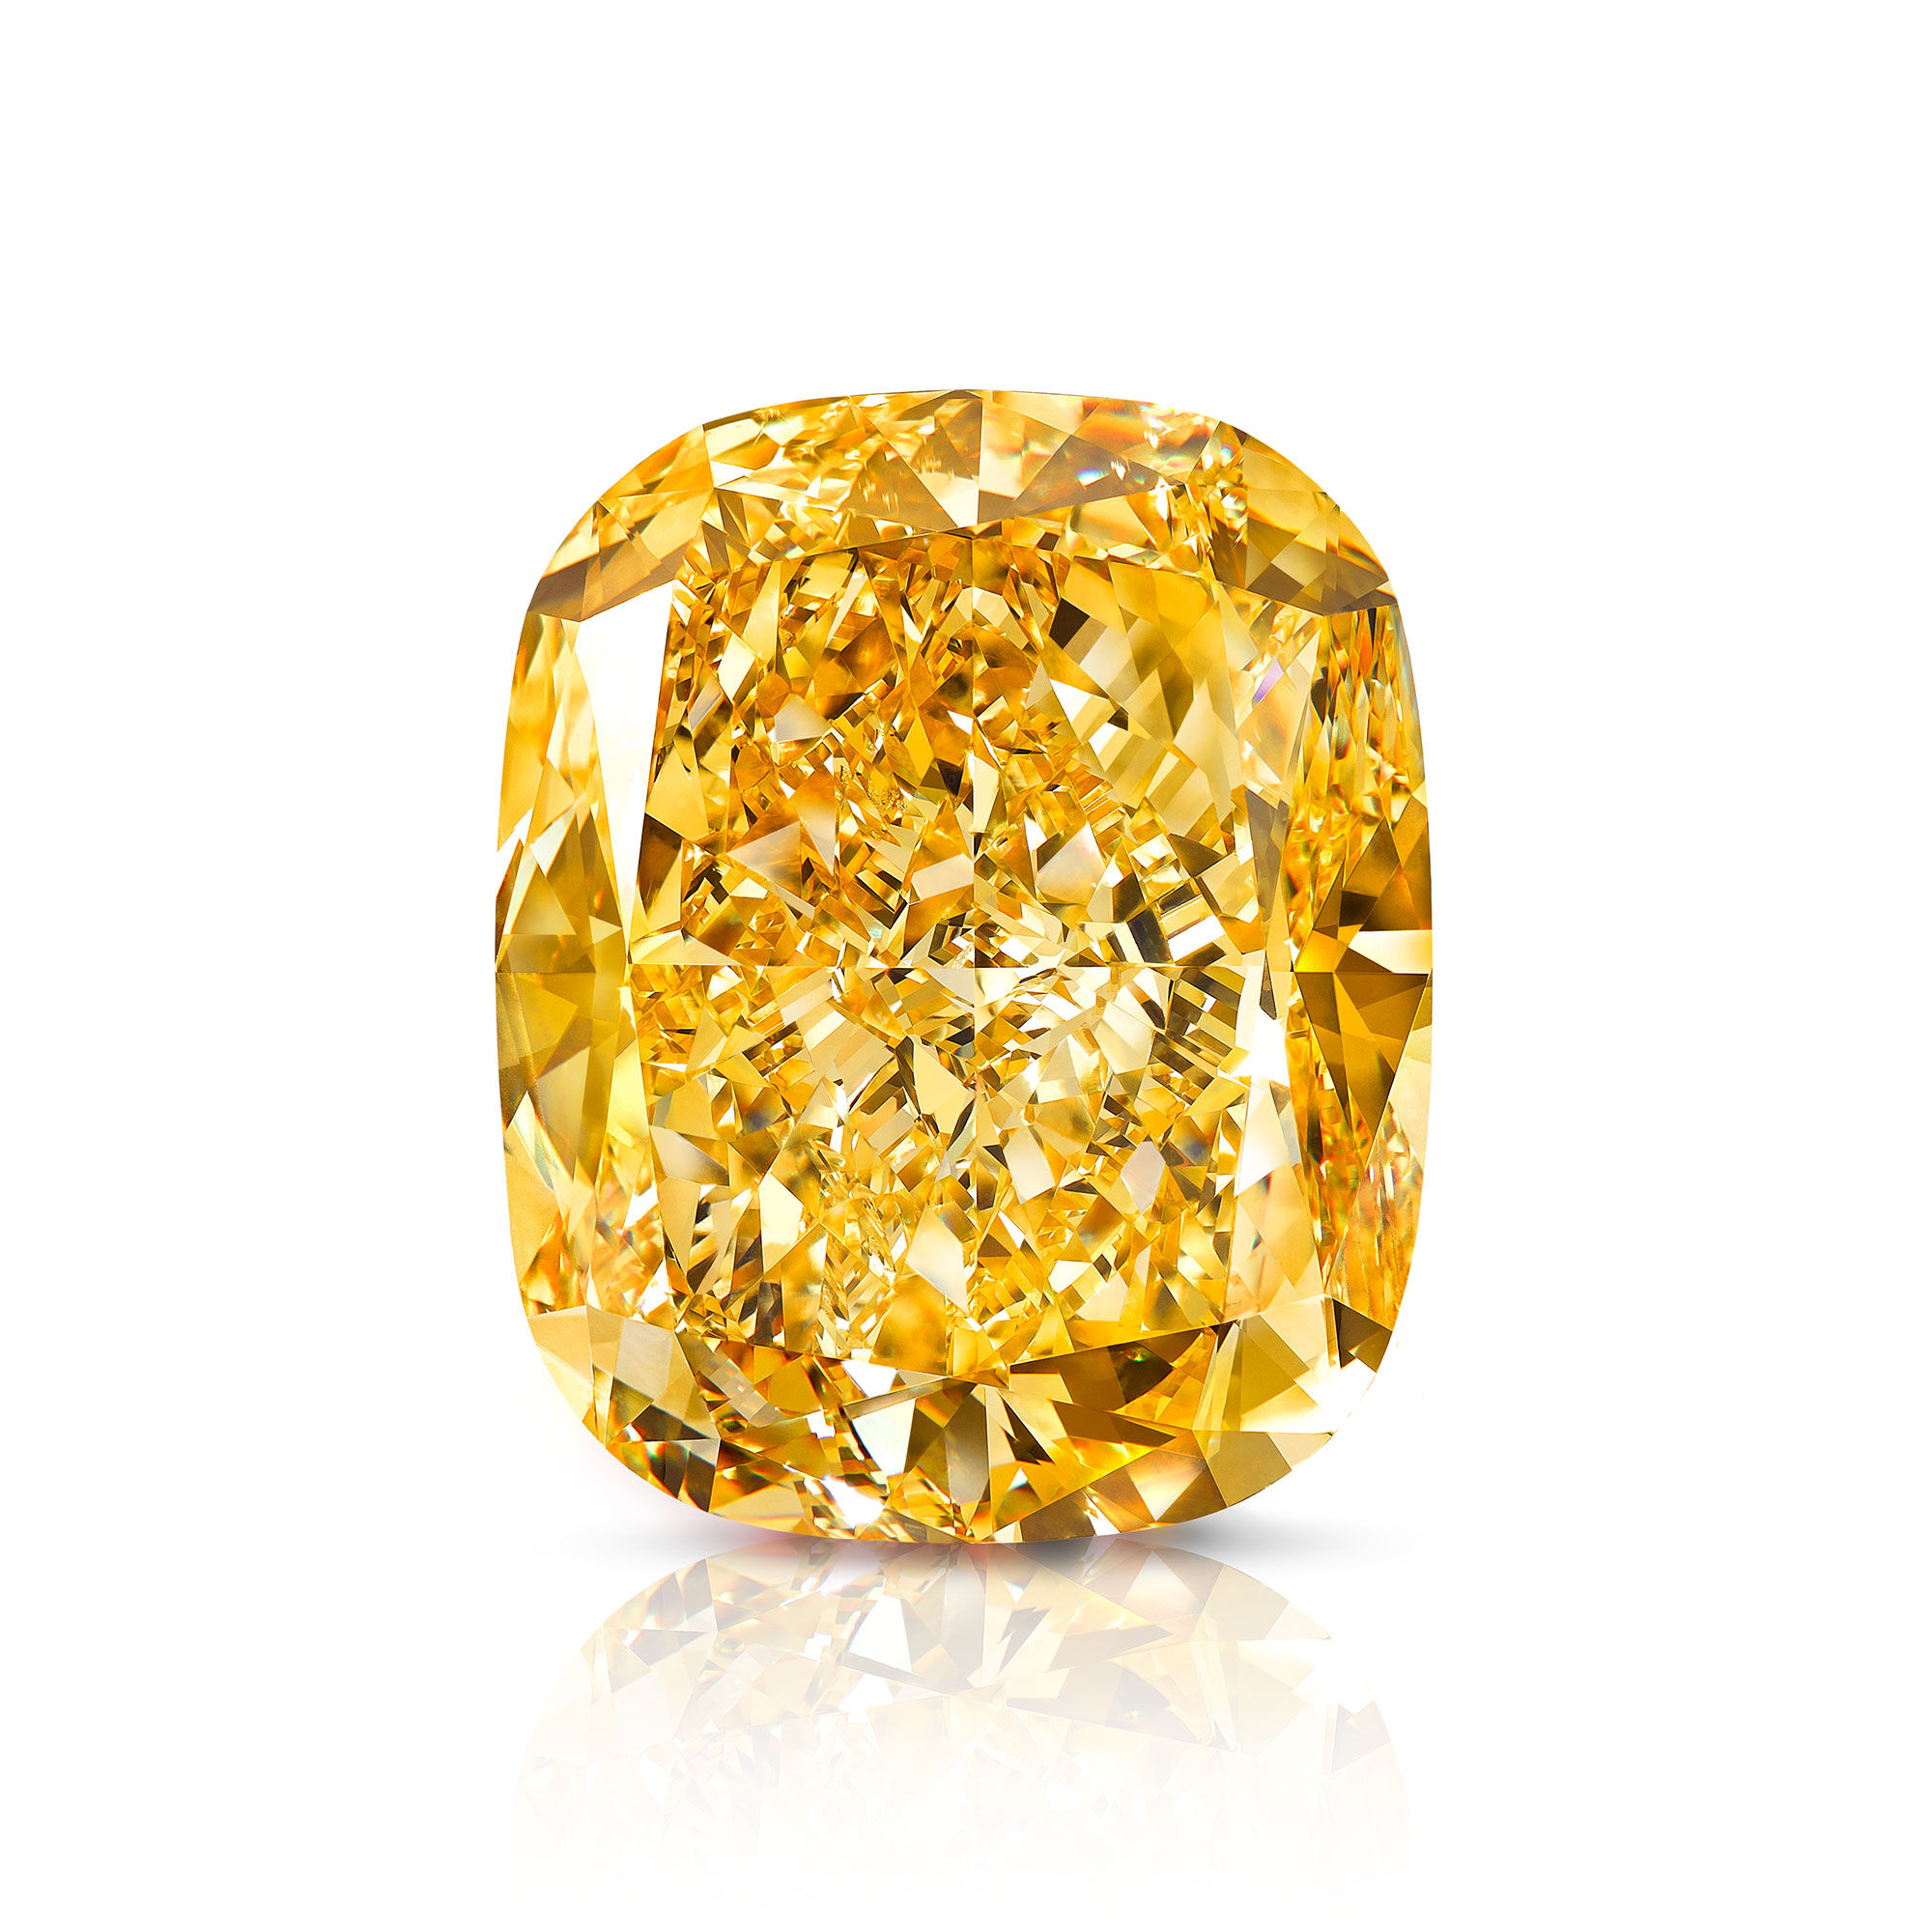 The Golden Empress famous Yellow Diamond from Graff